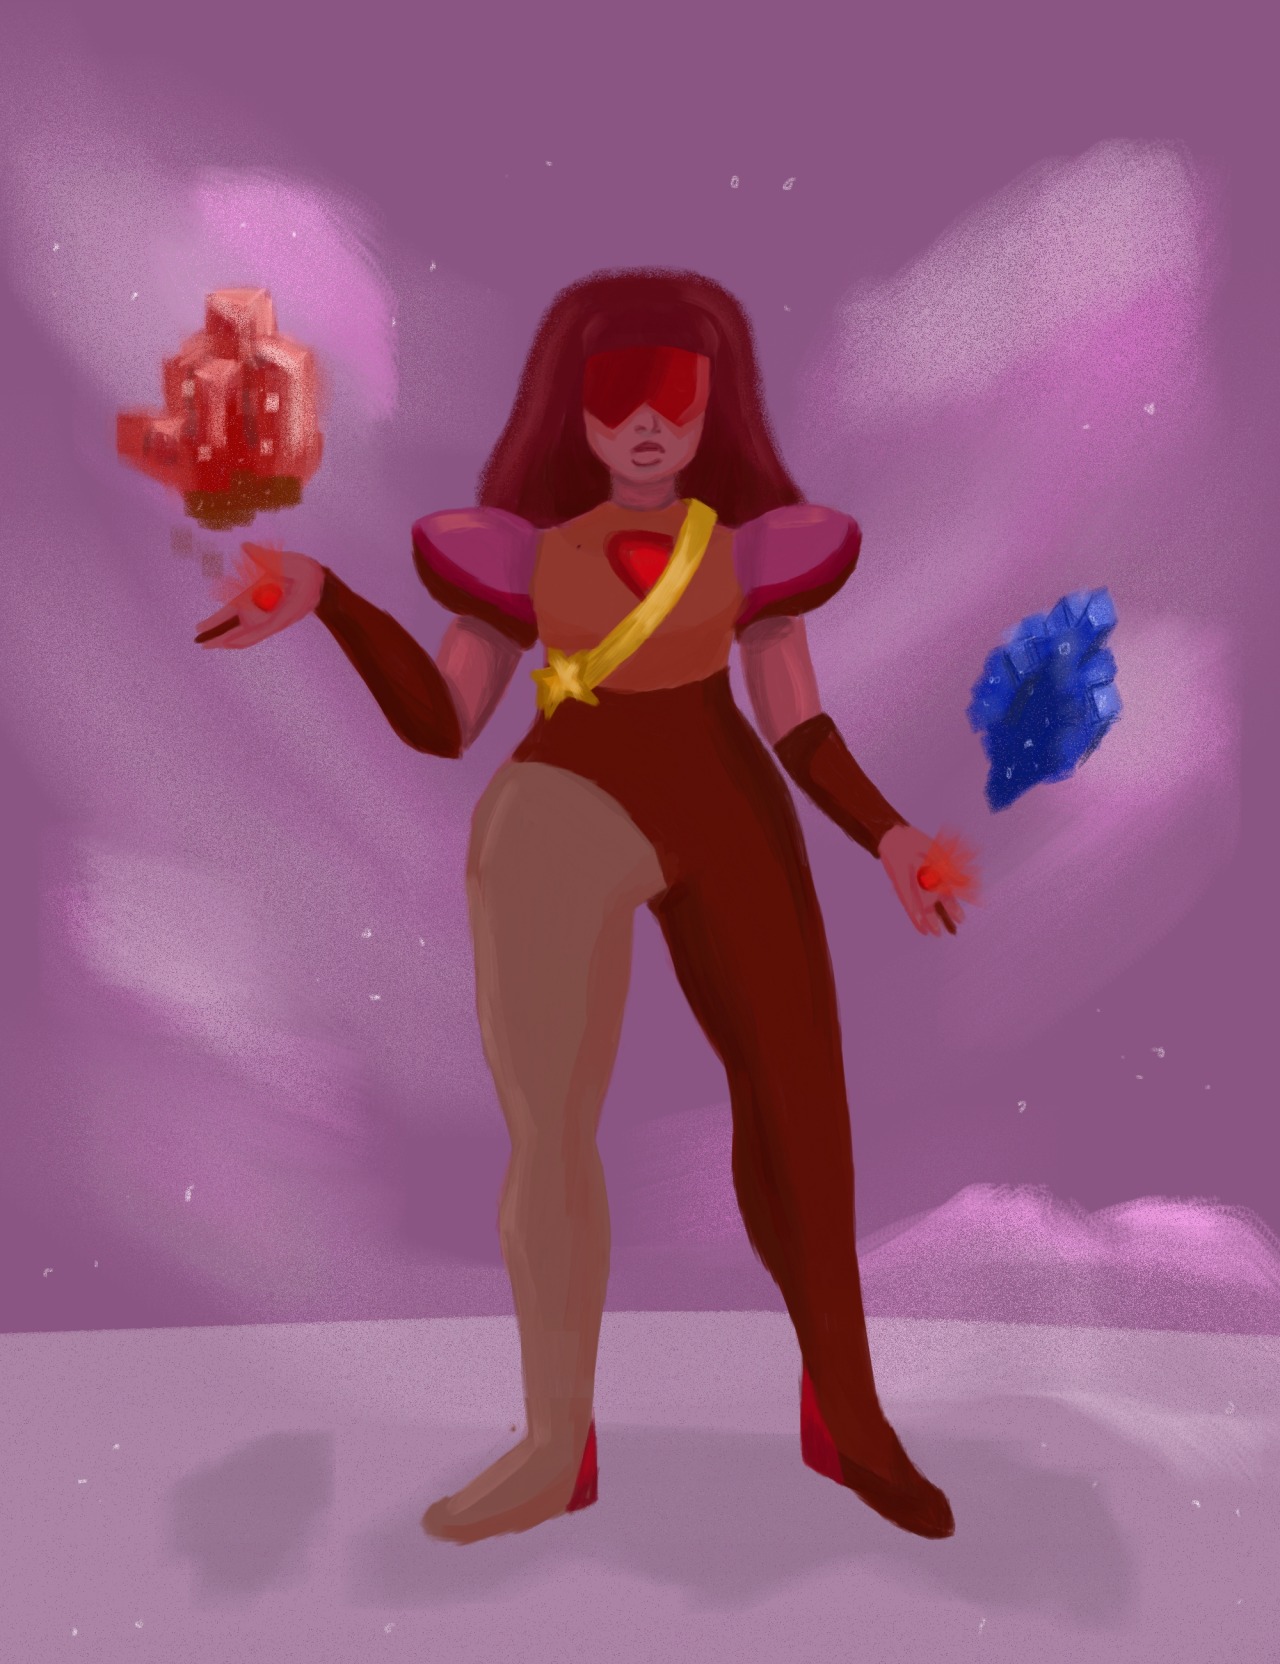 I love the pilot episode, garnet’s style is amazing!